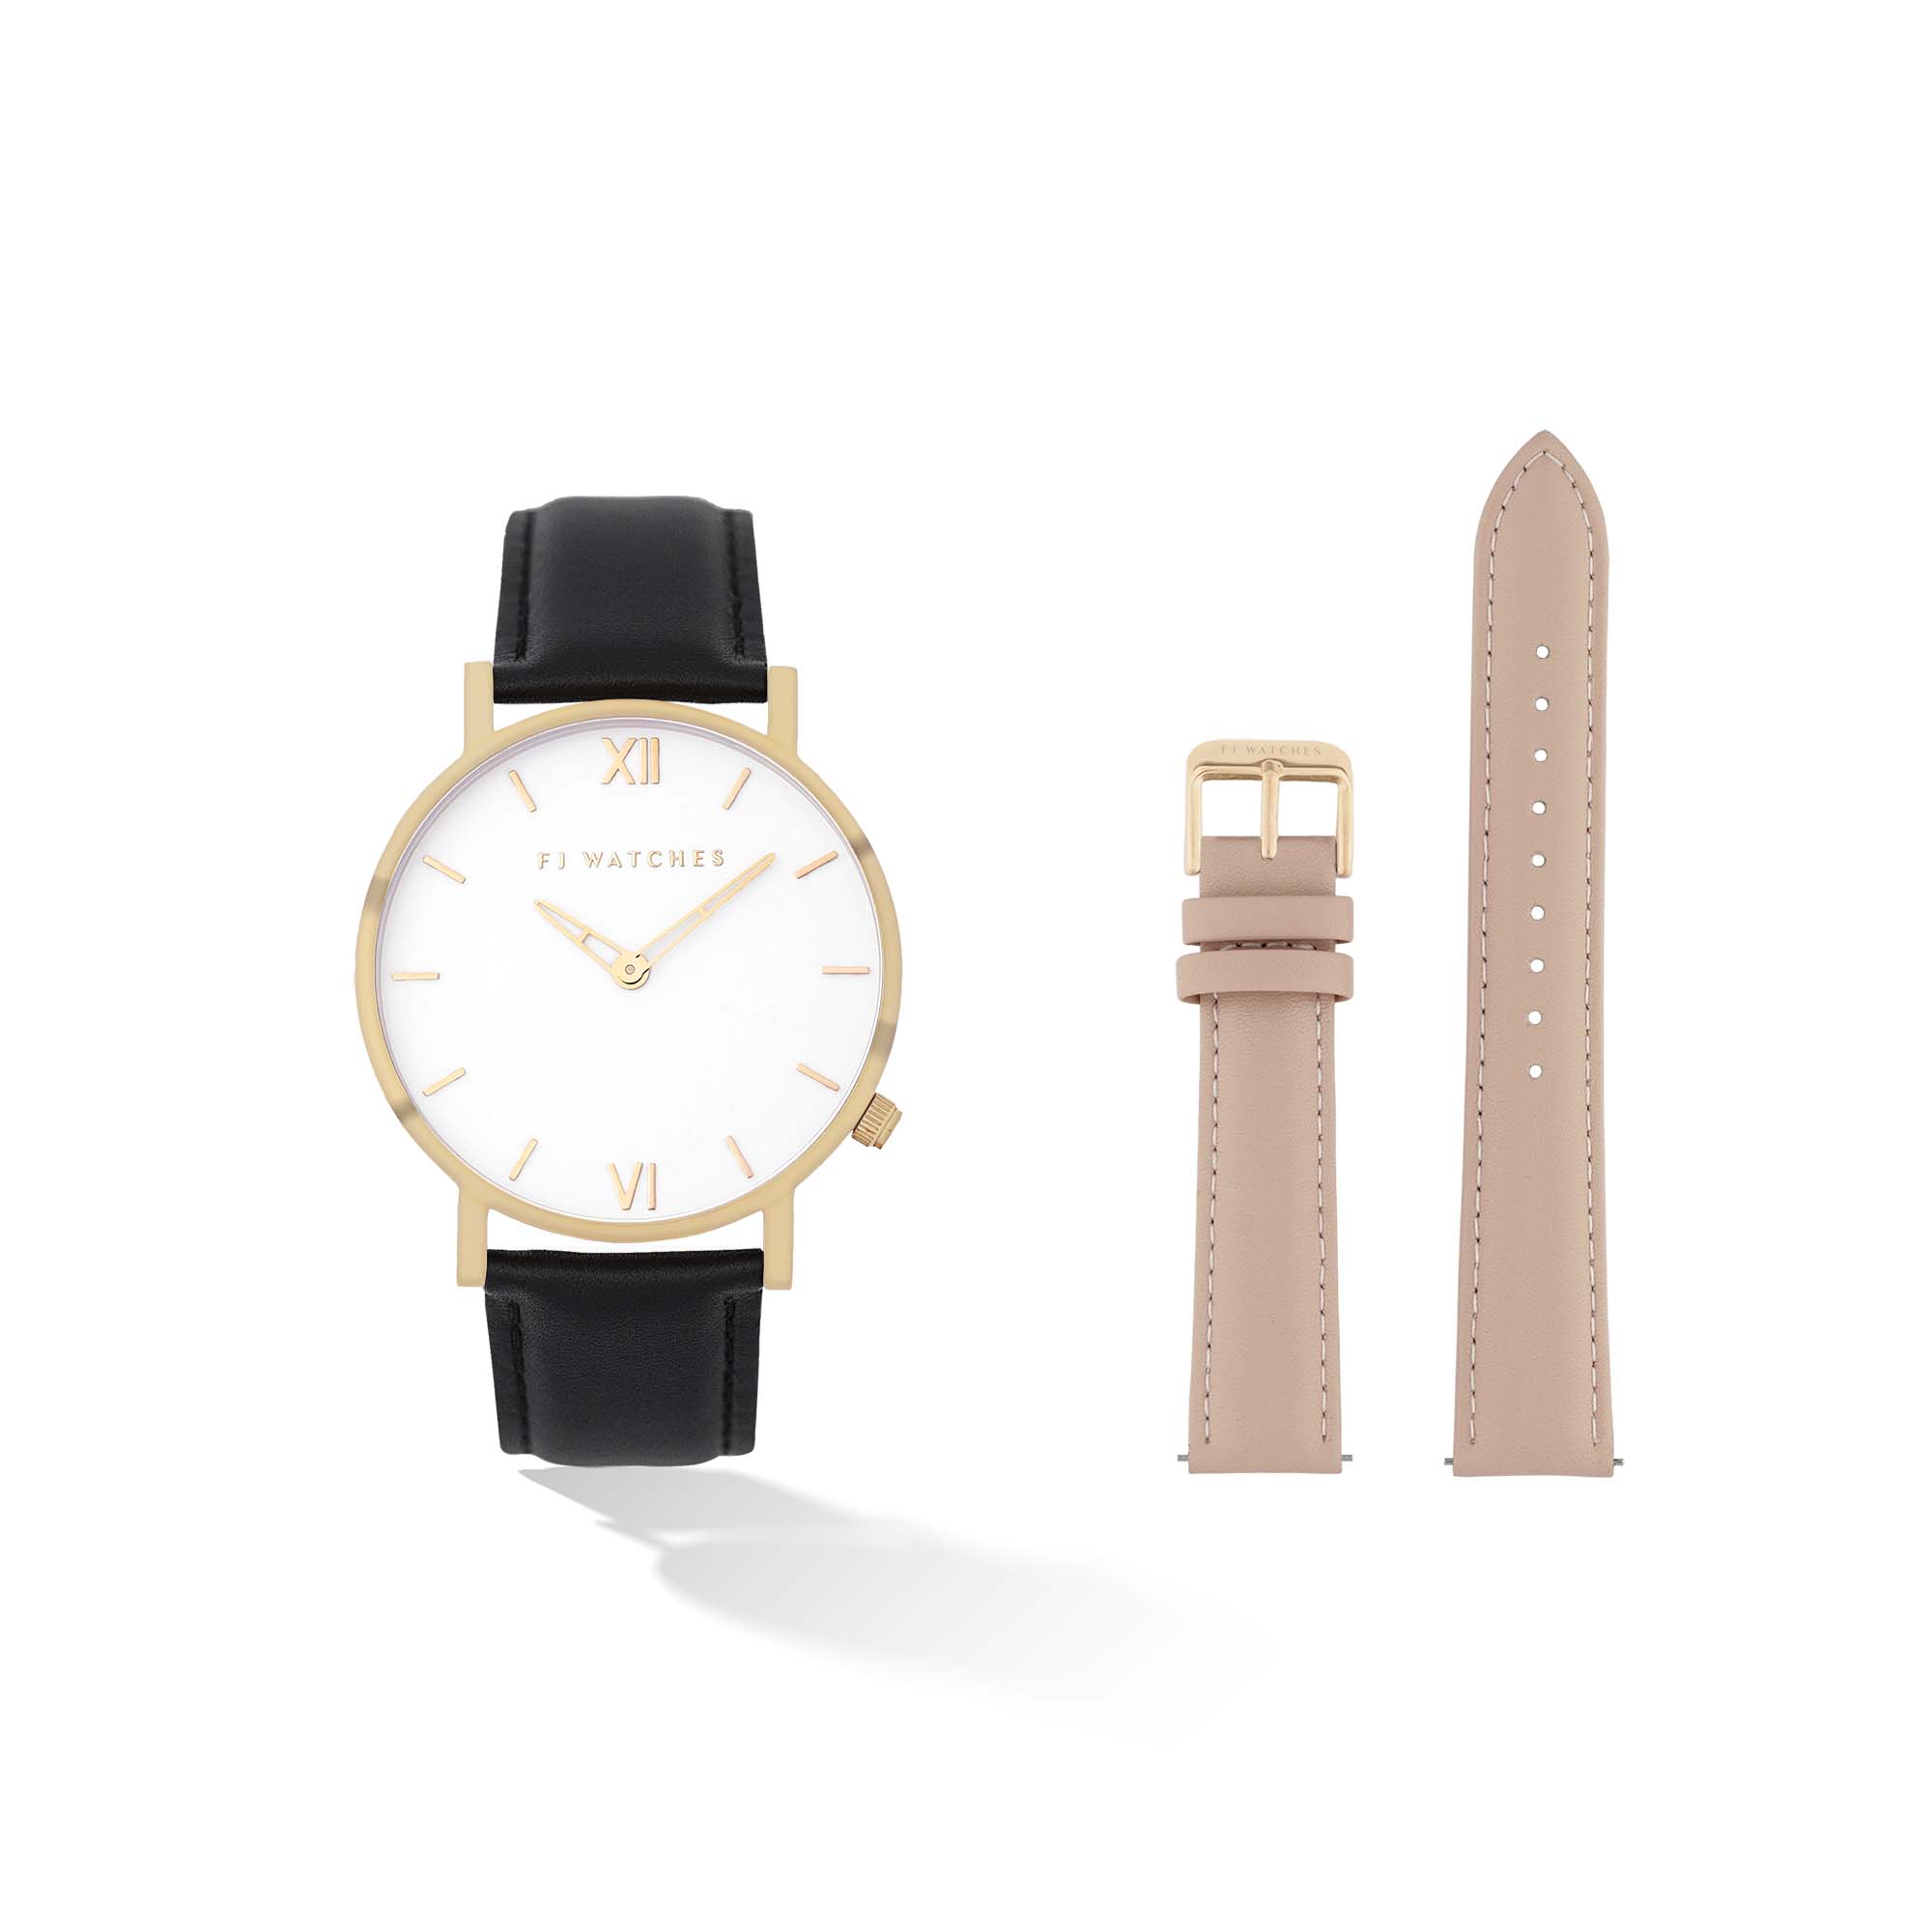 Discover the Sunlight set, a 36mm men and women watch from Five Jwlry. Equipped with a minimalist white and gold dial. In this special edition, this watch comes with two leathers, one black leather and one beige. The perfect gift!